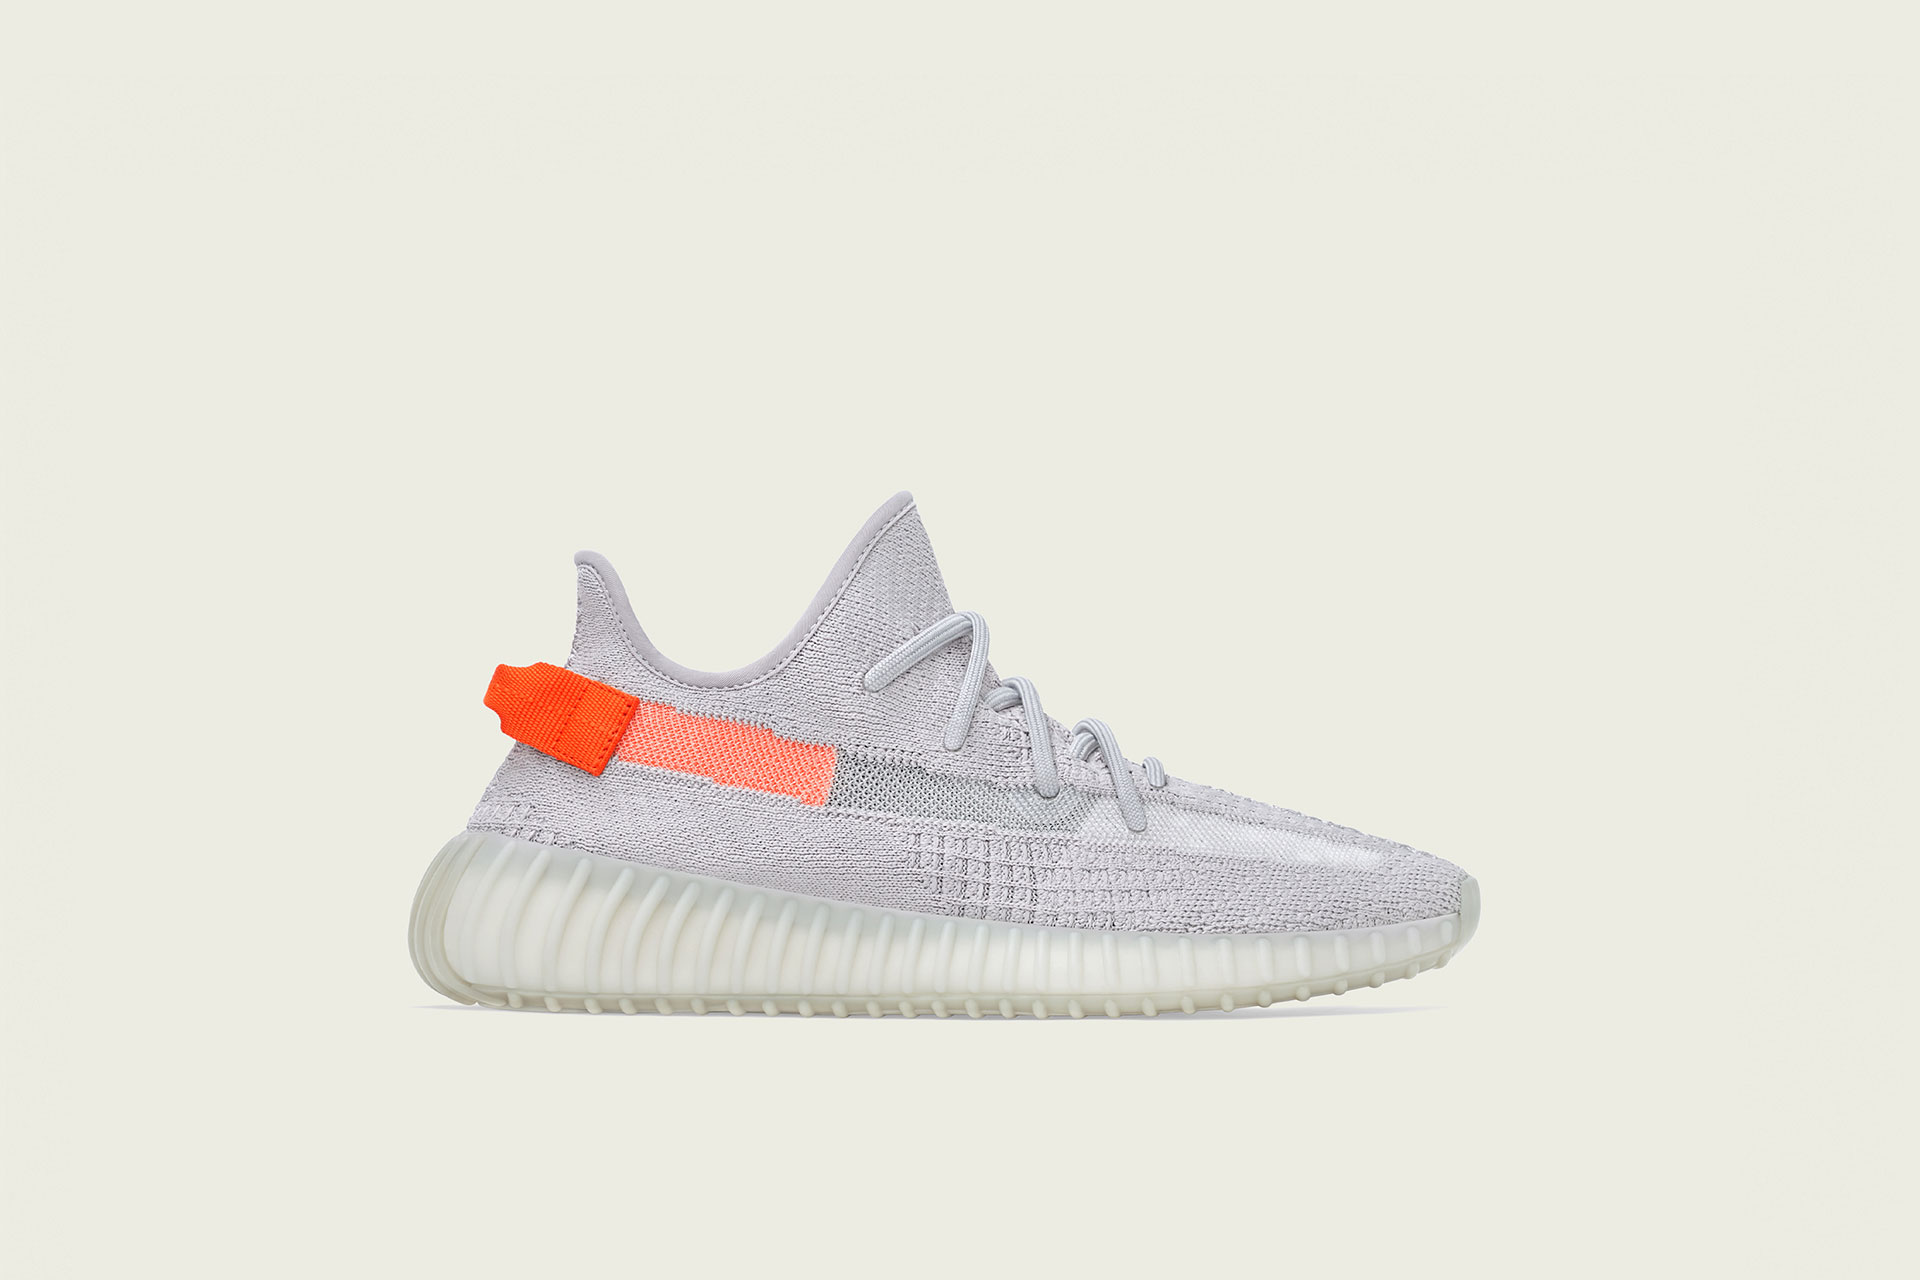 Terminal Kanin Ruin adidas Yeezy Boost 350 V2 - FX9017 - Tail Light - Footshop - Releases